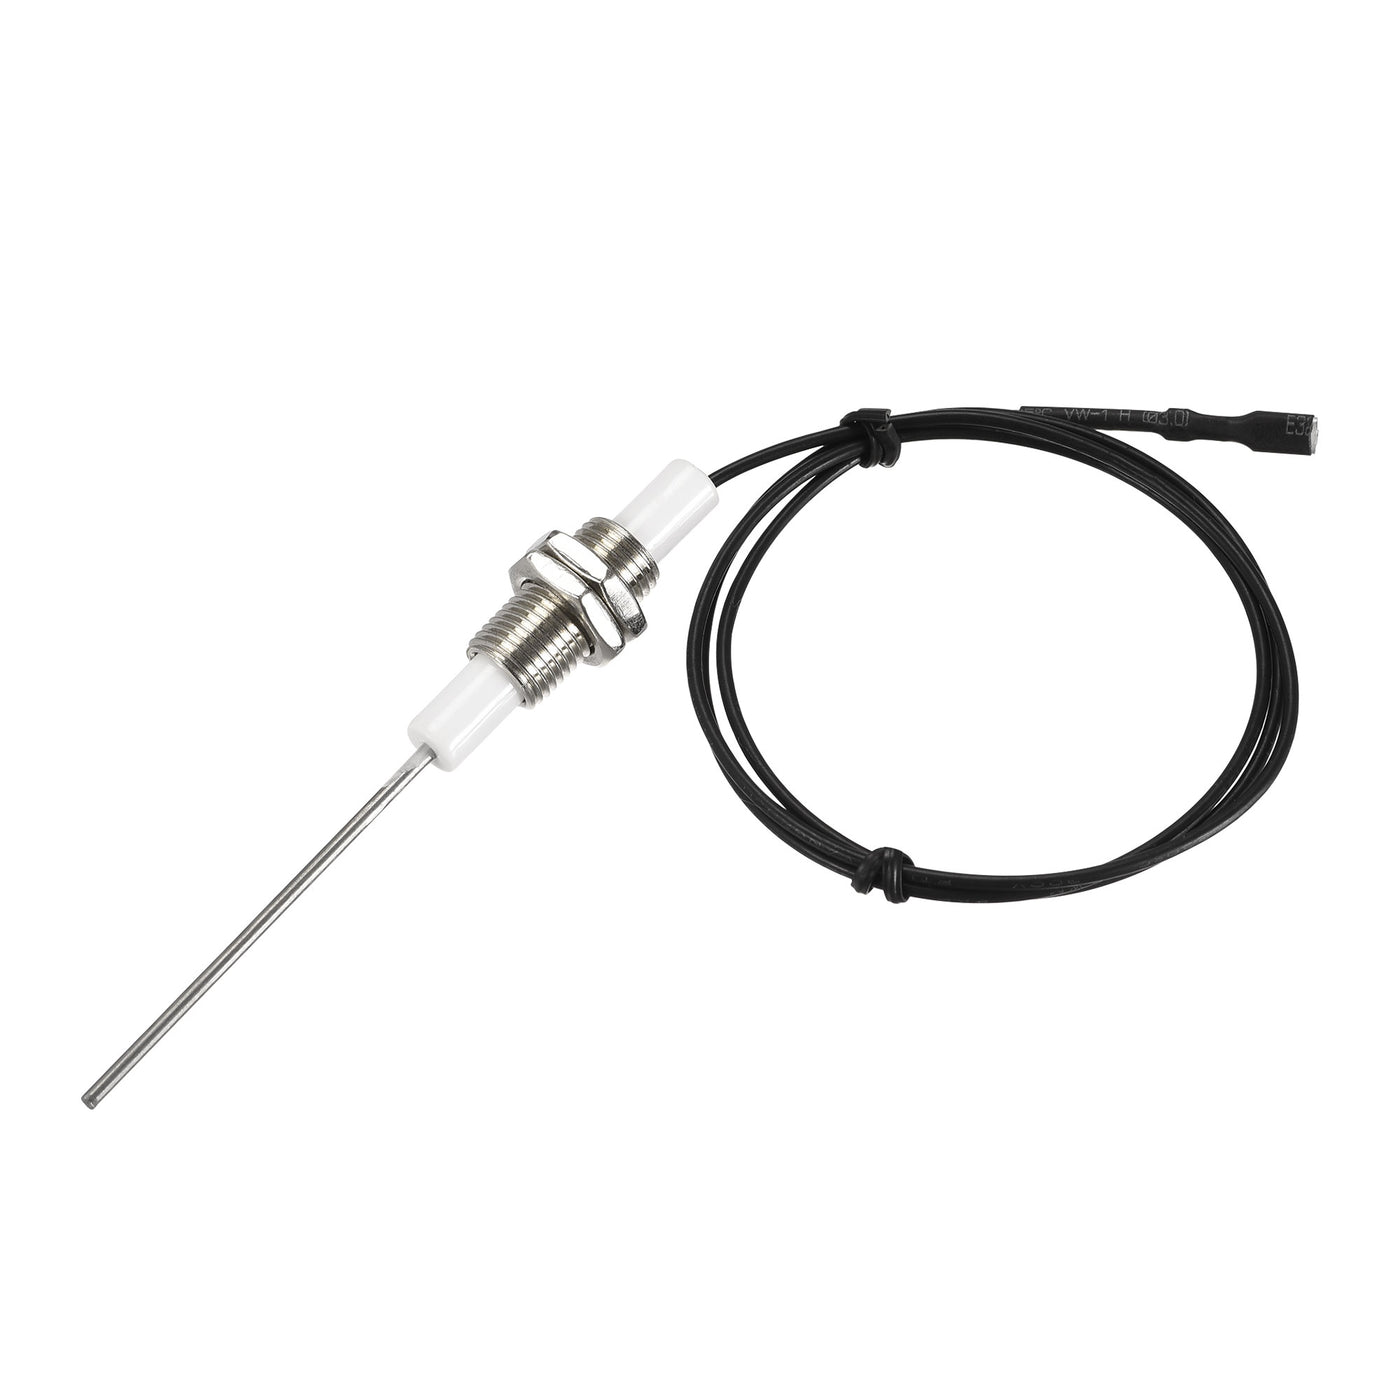 uxcell Uxcell Ignitor Wire Ceramic Electrode Assembly 600mm Length Gas Grill Ignitor Wire Ignition Electrode Replacement